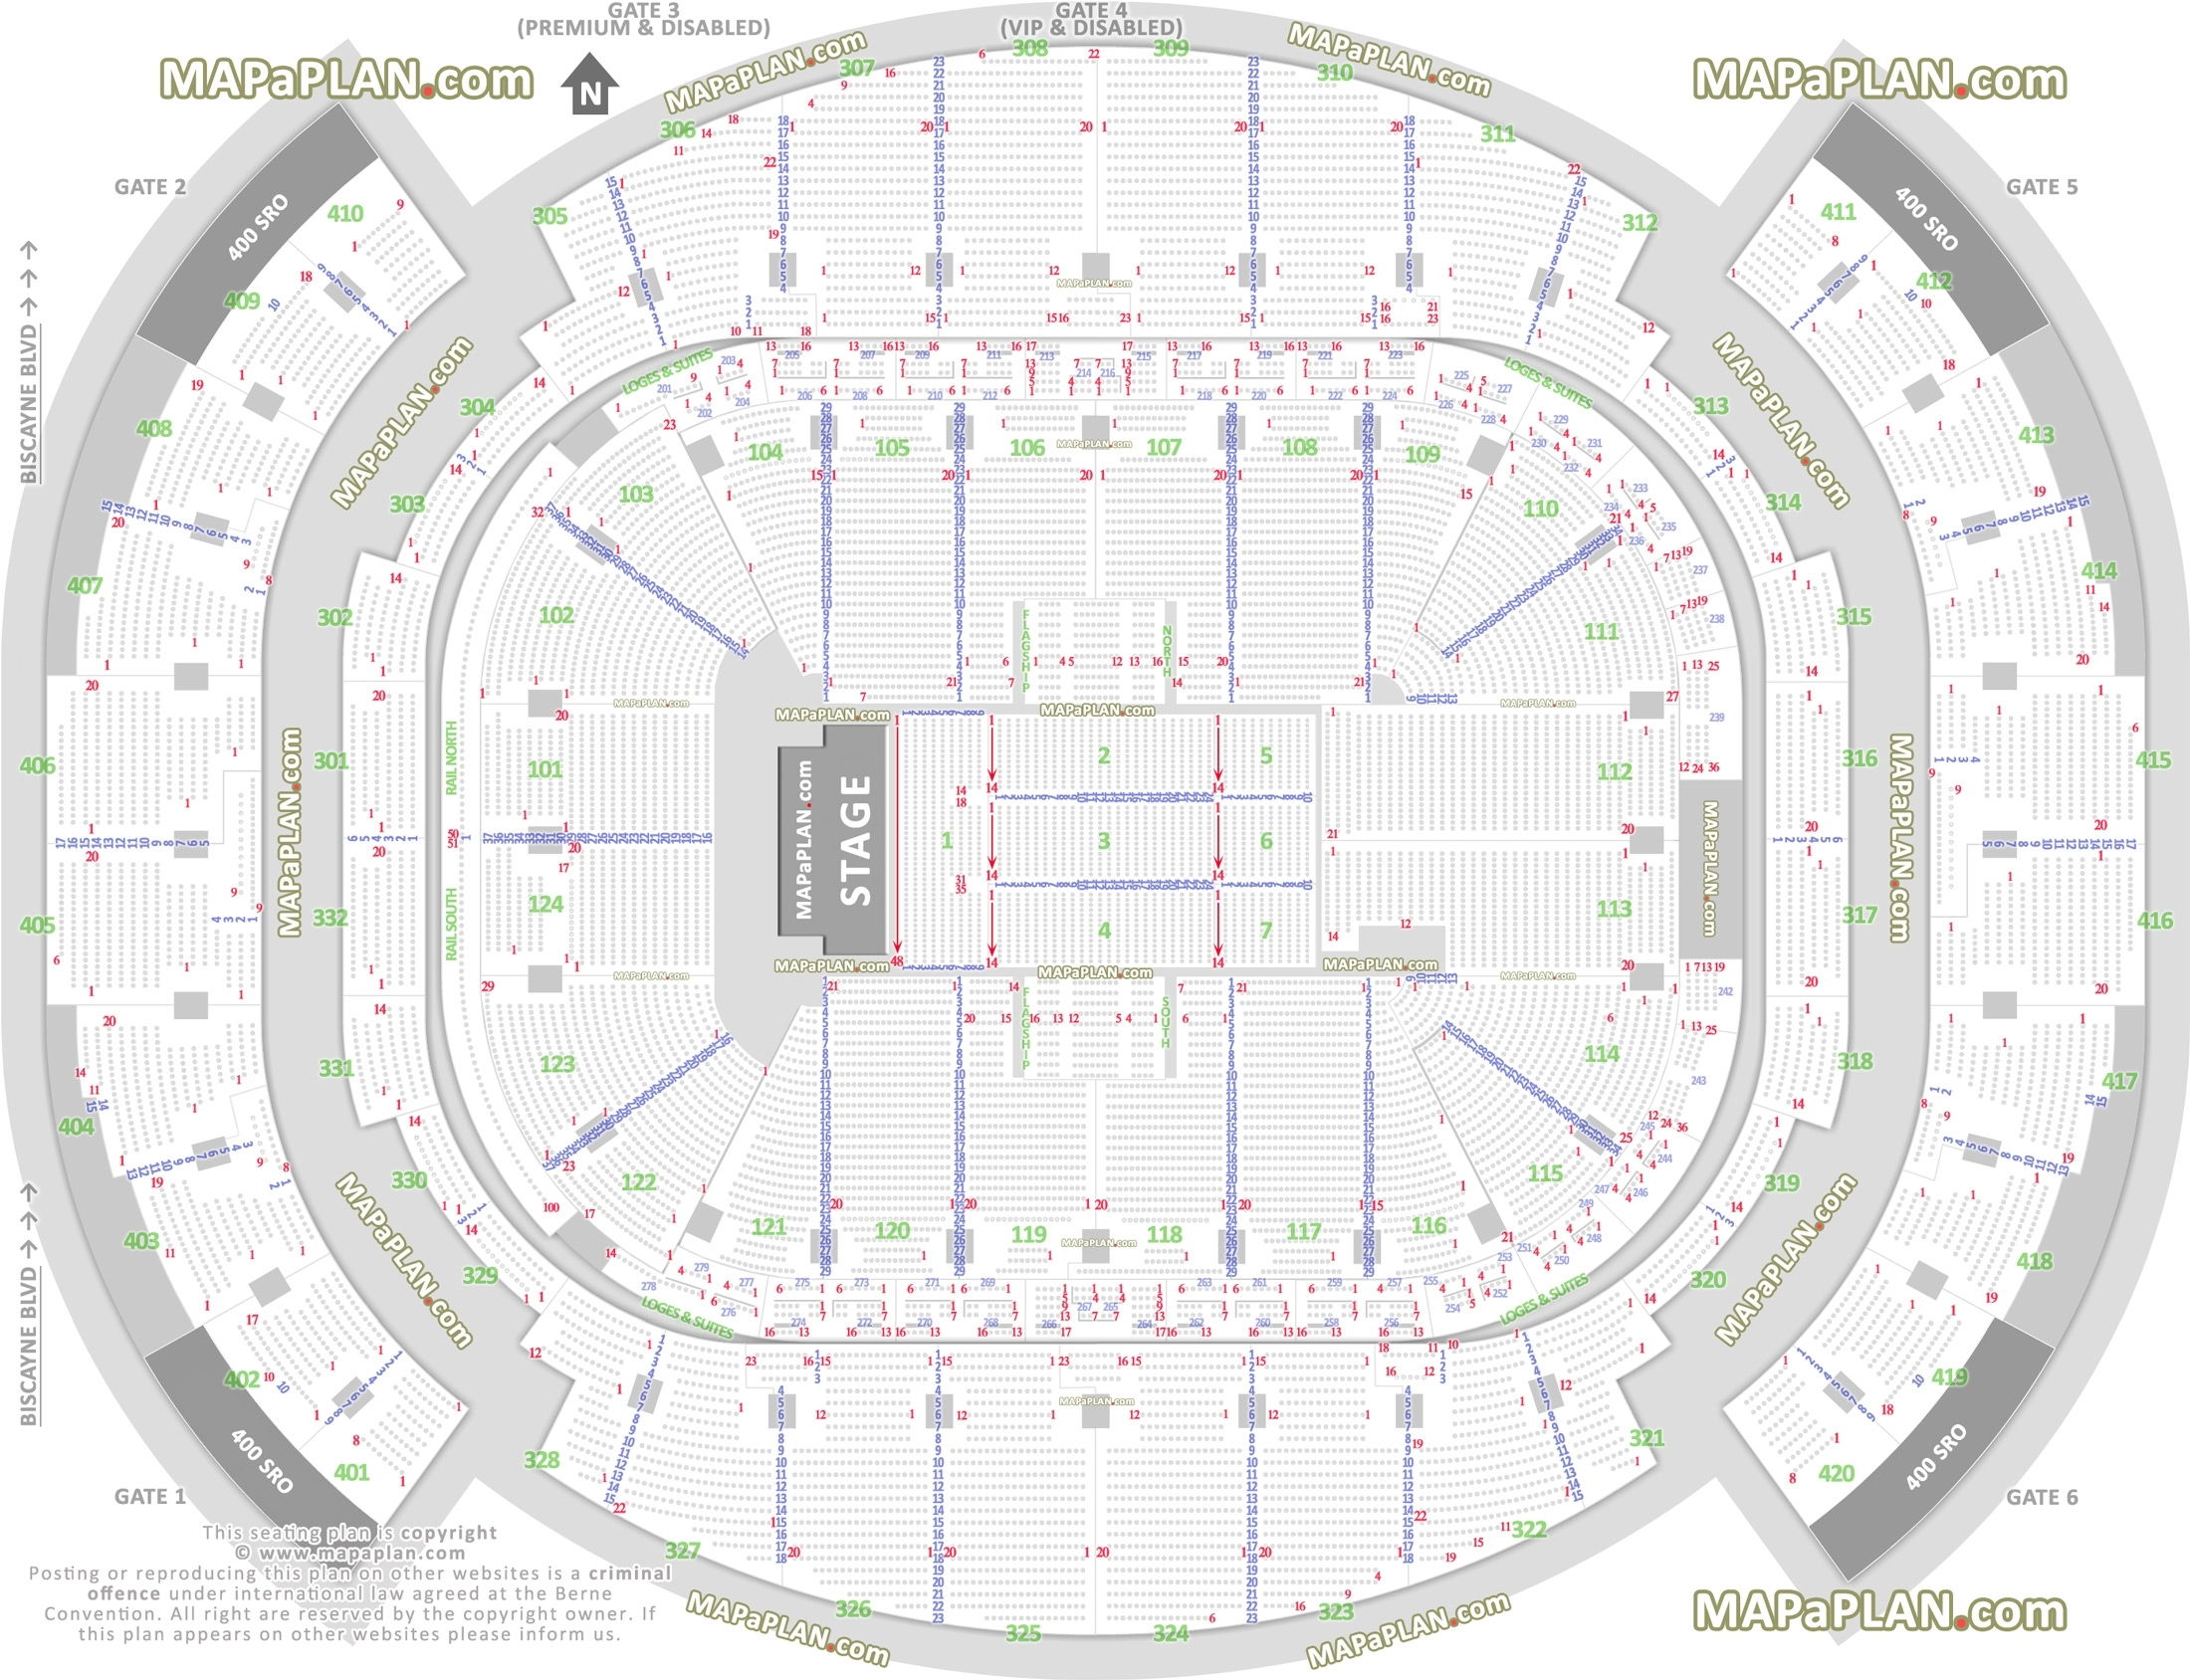 Miami Heat Arena Seating Chart With Seat Numbers Marta Intended For 